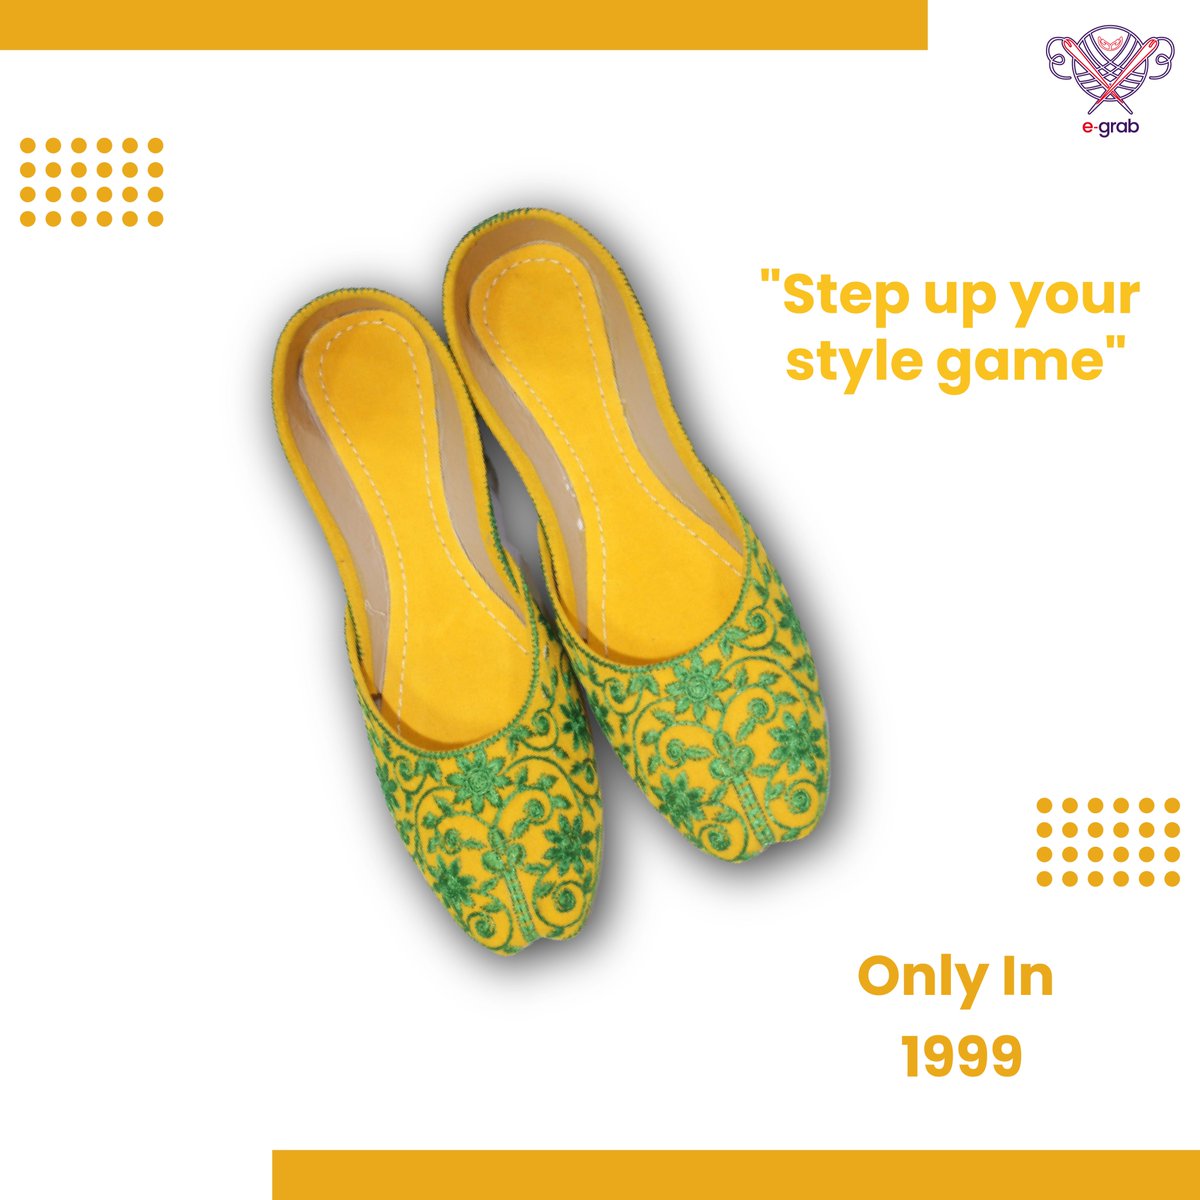 'Stay comfortable and stylish with this trendy Khussa'

Dm us for order and queries.
Nation wide COD Available🇵🇰

#ShoesOfInstagram #ShoeLover #ShoeAddict #ShoeObsessed #ShoeGame #ShoeStyle #ShoeFashion #ShoeSelfie #ShoeGoals #ShoeFie #InstaShoes #ShoeSwag